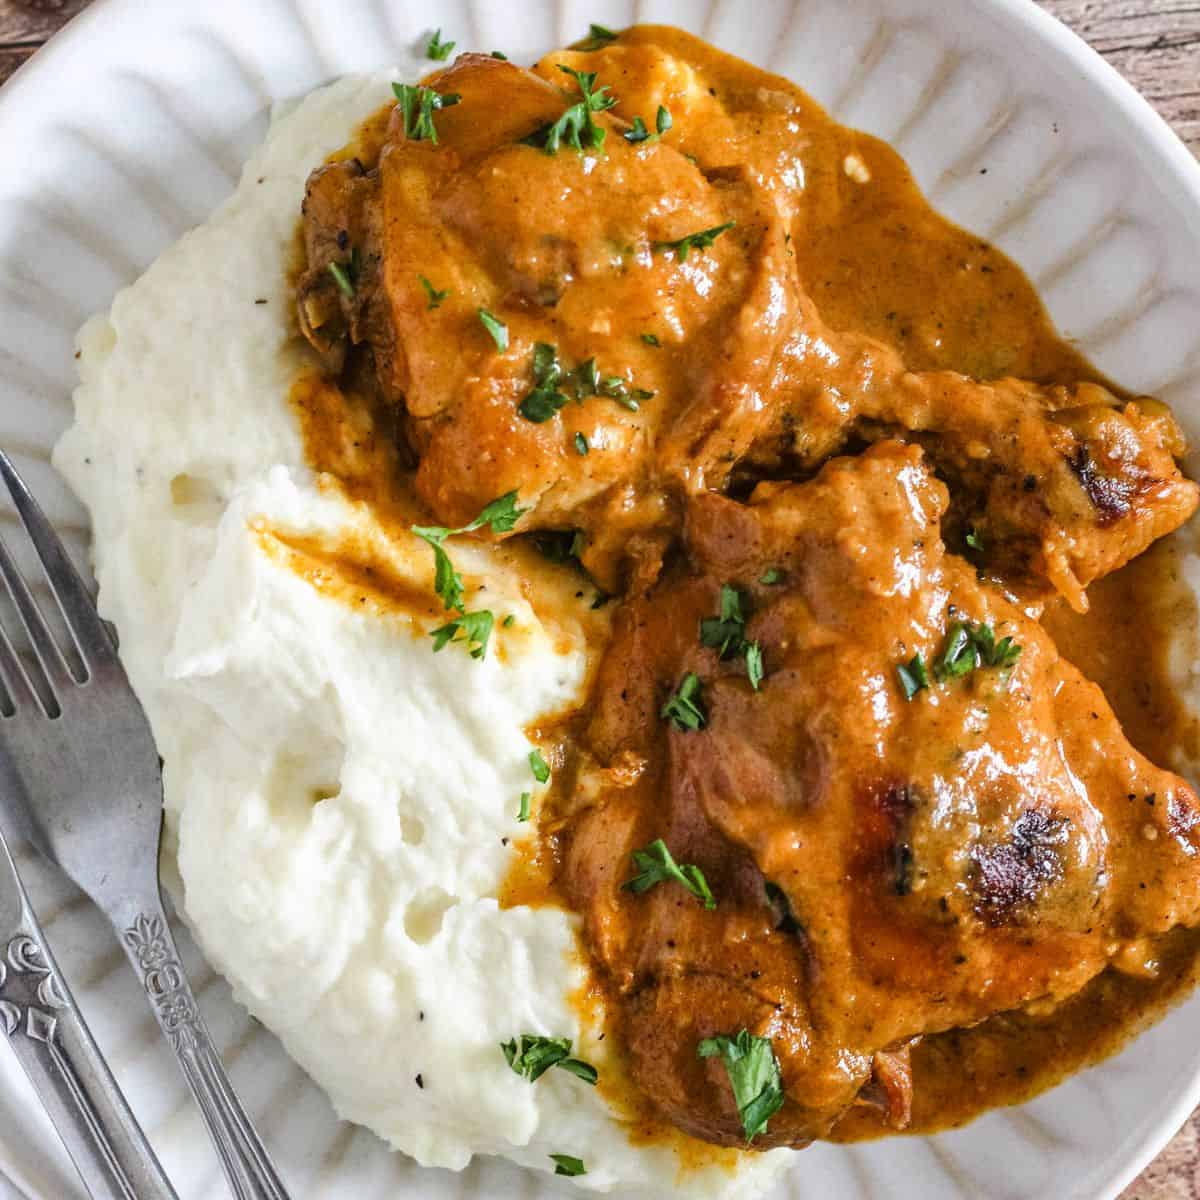 Plate of mashed potatoes with chicken paprikash served with fork and knife on the side.